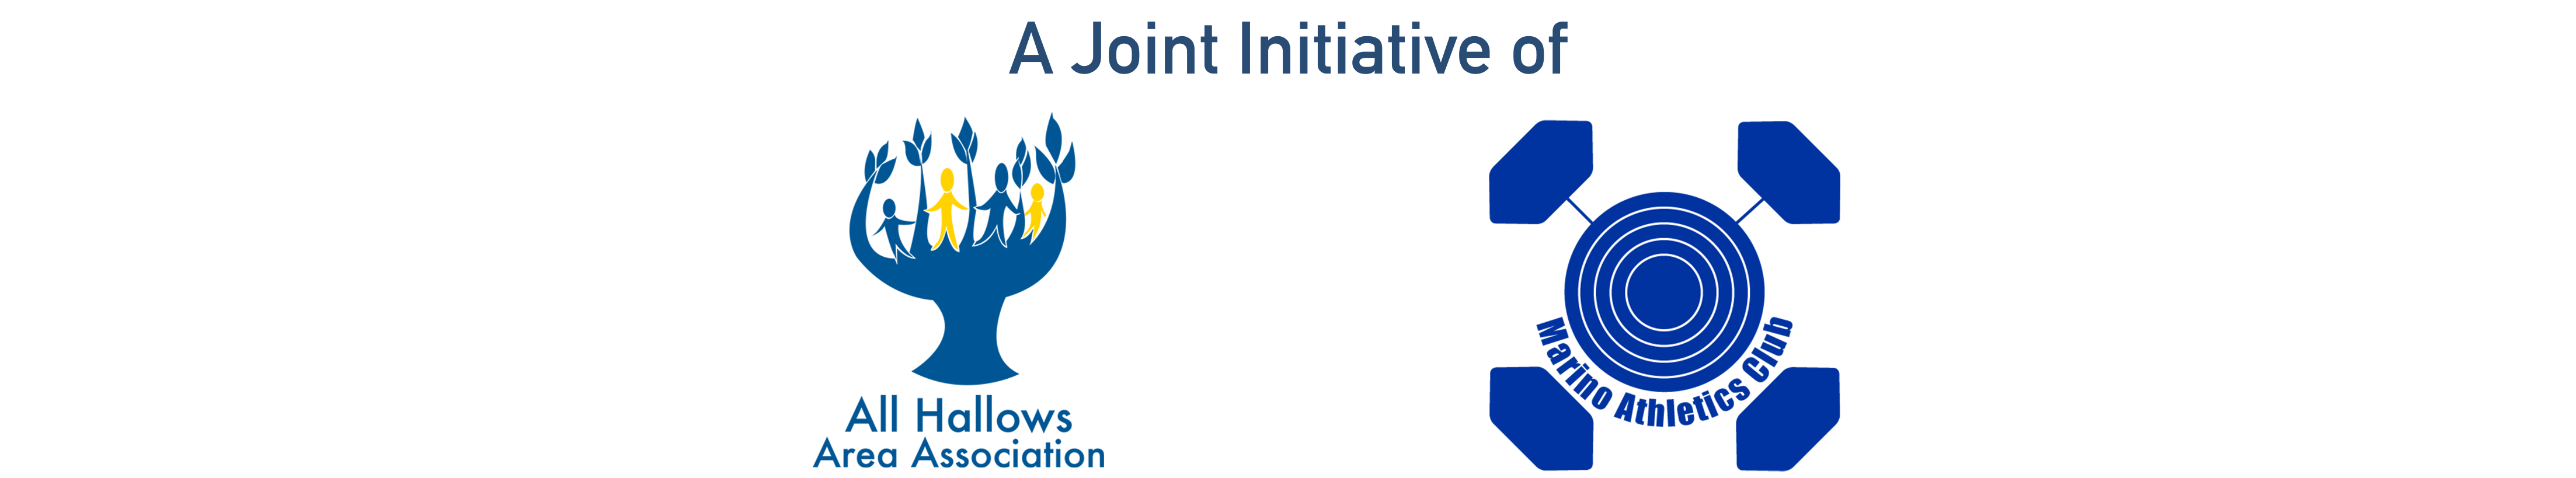 joint-initiativepng